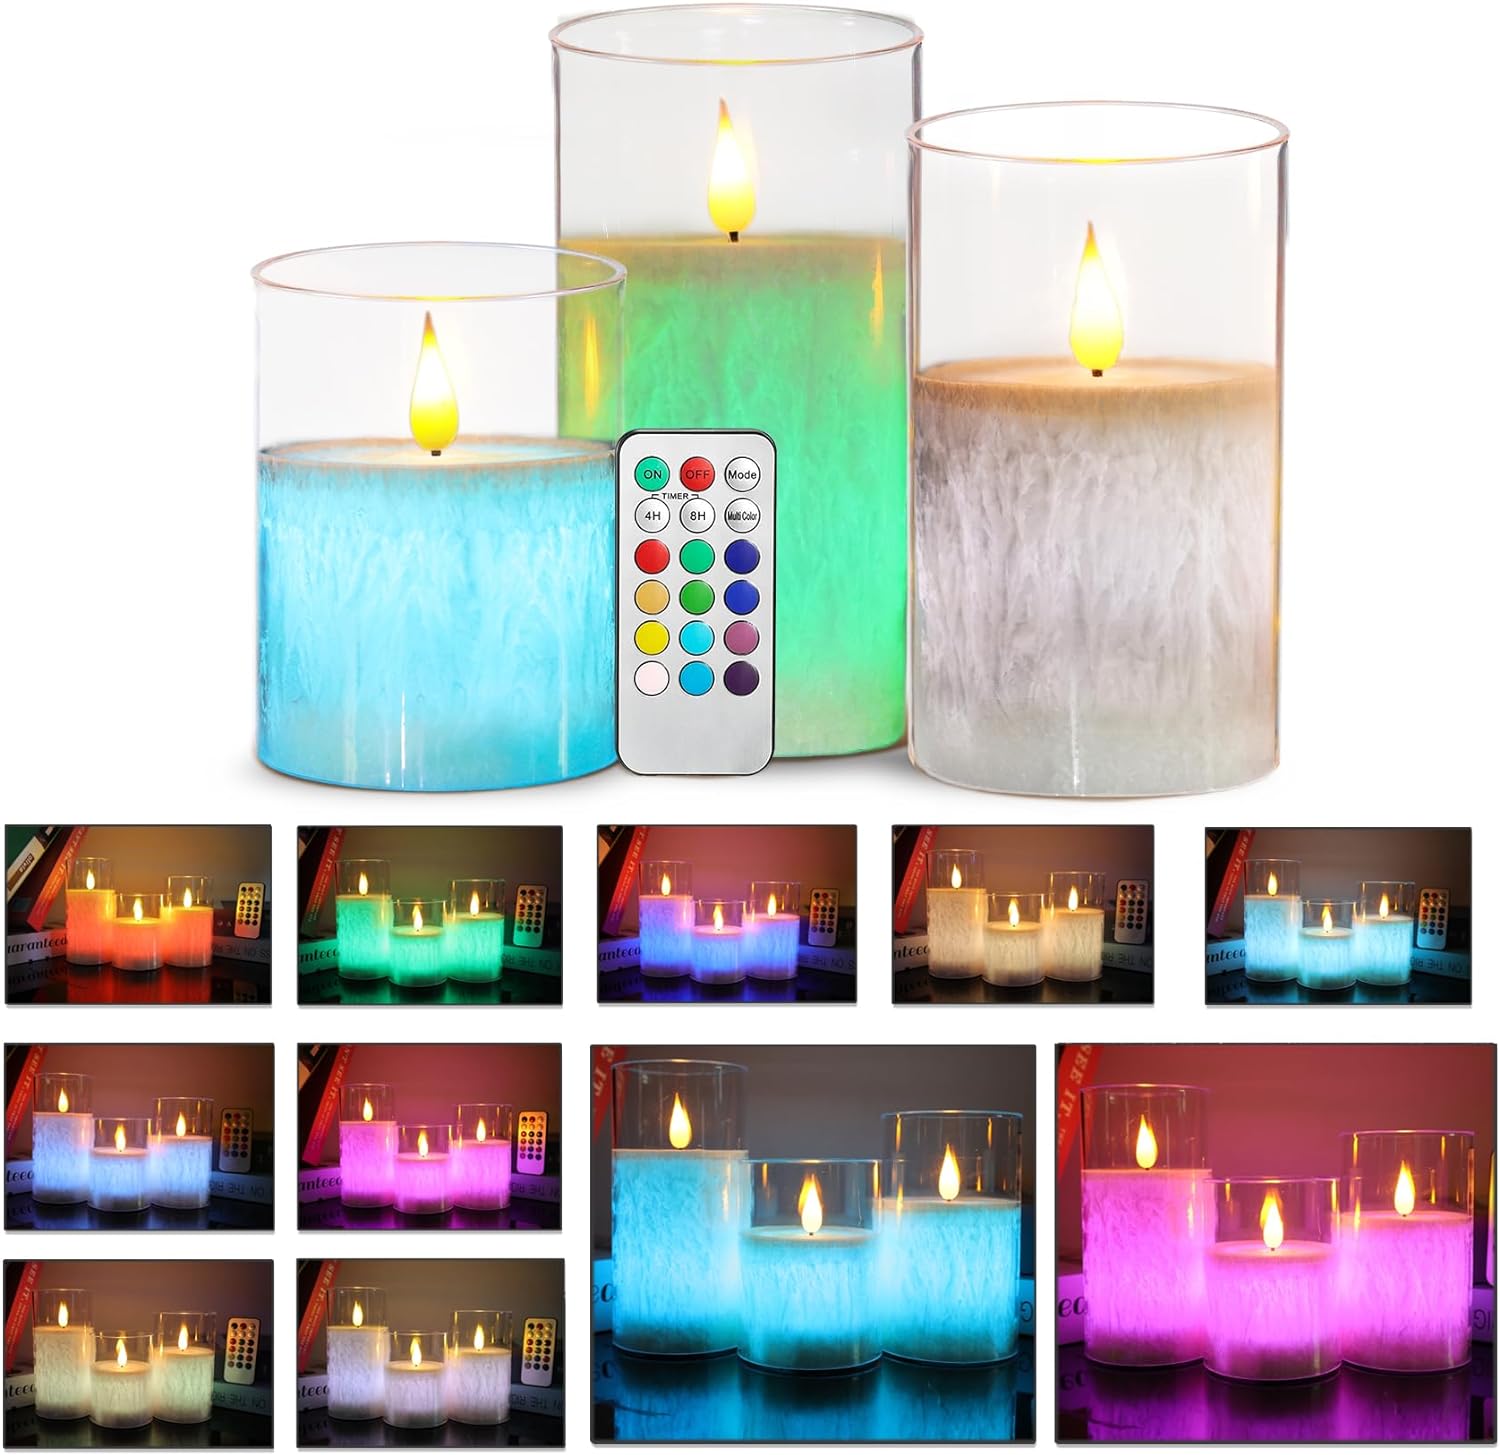 Da by Flameless Candle, Battery Powered LED Column Mobile Flame Candle with Timer and Remote Control, 3 Piece Acrylic Plexiglass Box Candle D3 H4 5 6